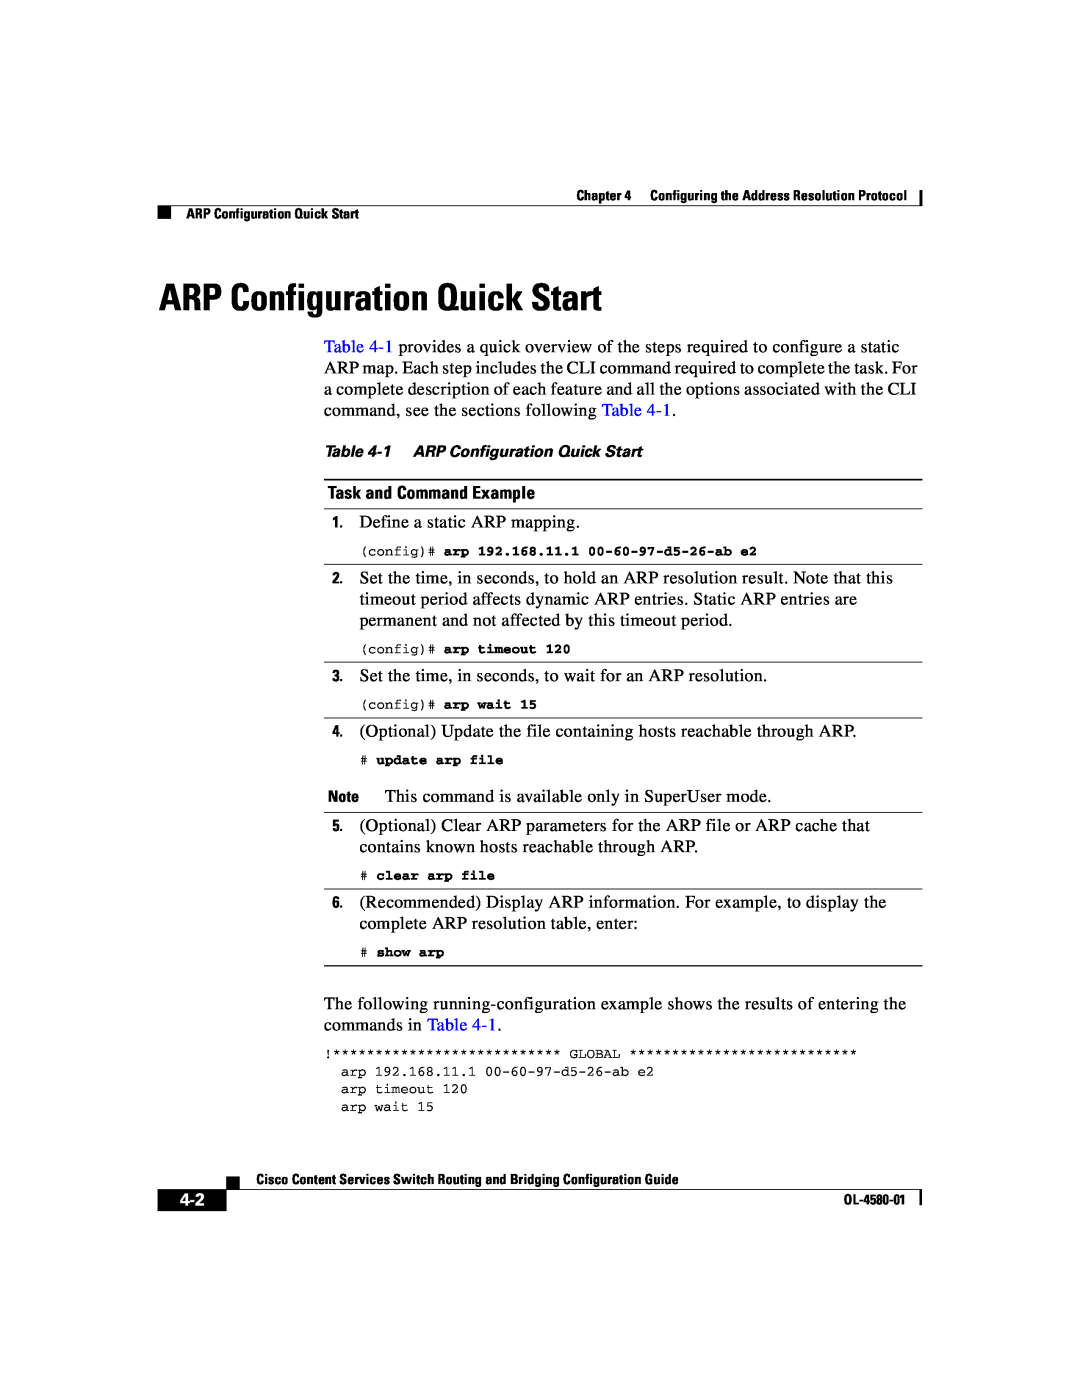 Cisco Systems OL-4580-01 manual Task and Command Example, 1 ARP Configuration Quick Start 